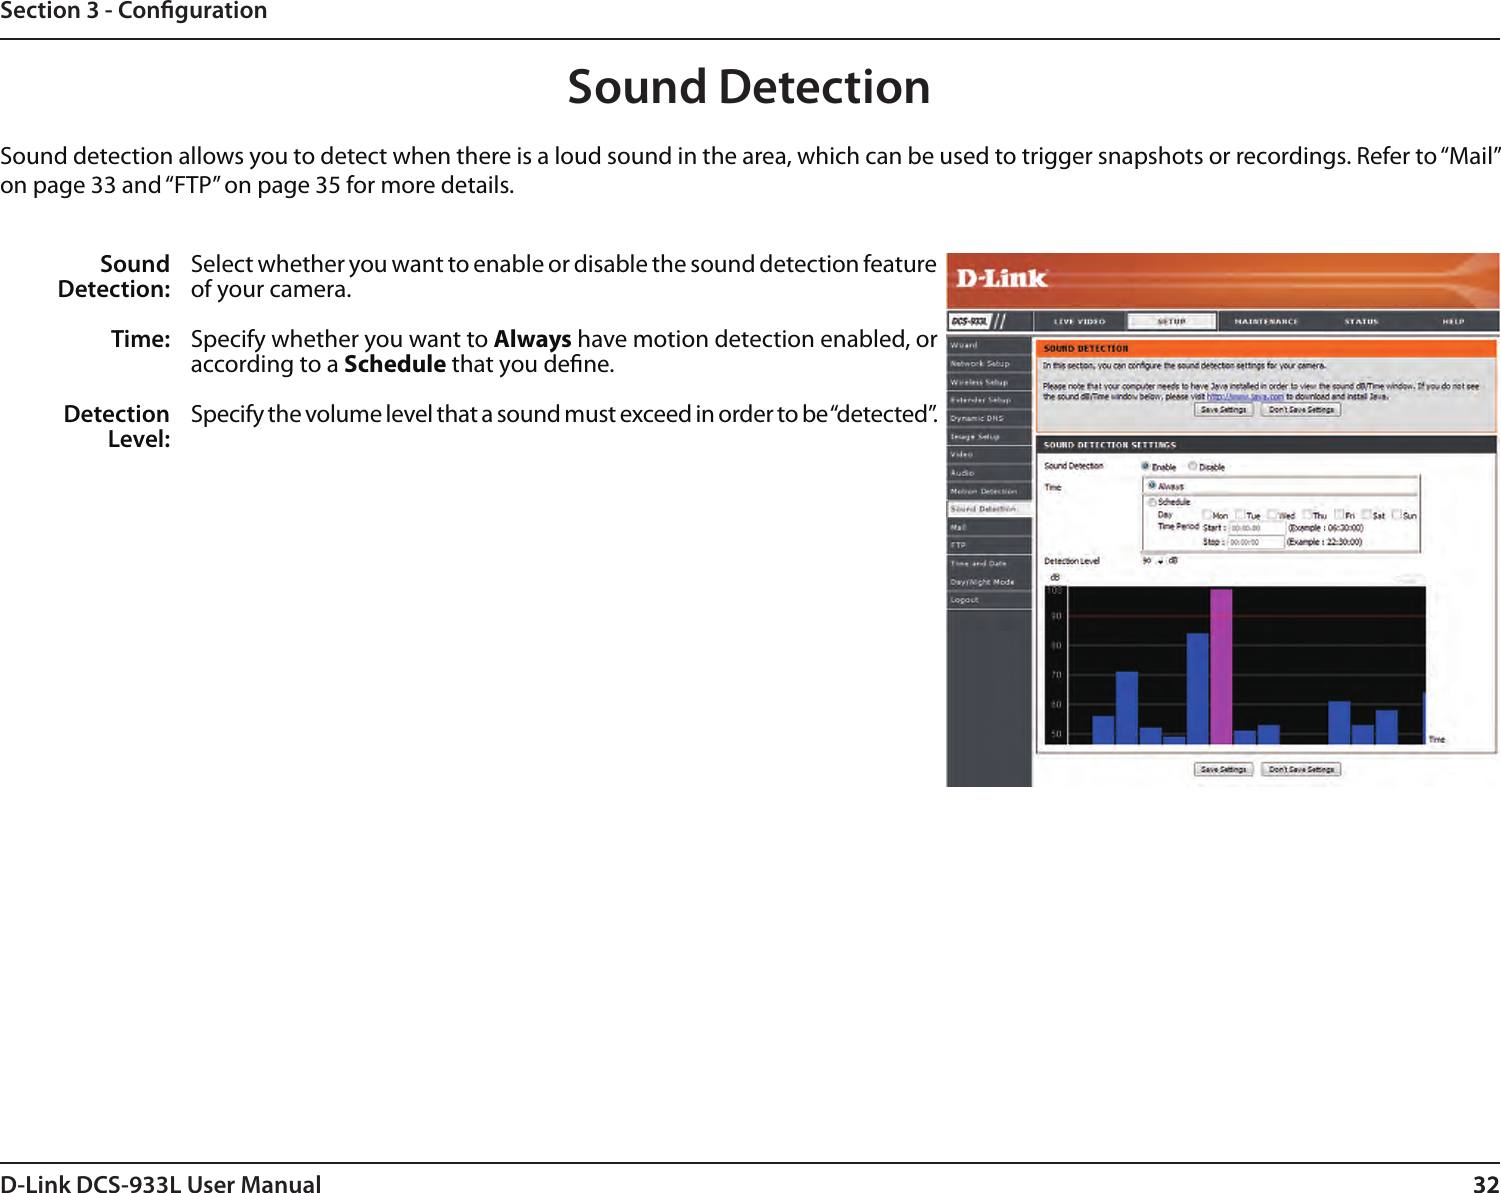 32D-Link DCS-933L User Manual 32Section 3 - CongurationSound DetectionSound detection allows you to detect when there is a loud sound in the area, which can be used to trigger snapshots or recordings. Refer to “Mail” on page 33 and “FTP” on page 35 for more details.Sound Detection:Time:Detection Level:Select whether you want to enable or disable the sound detection feature of your camera.Specify whether you want to Always have motion detection enabled, or according to a Schedule that you dene.Specify the volume level that a sound must exceed in order to be “detected”.